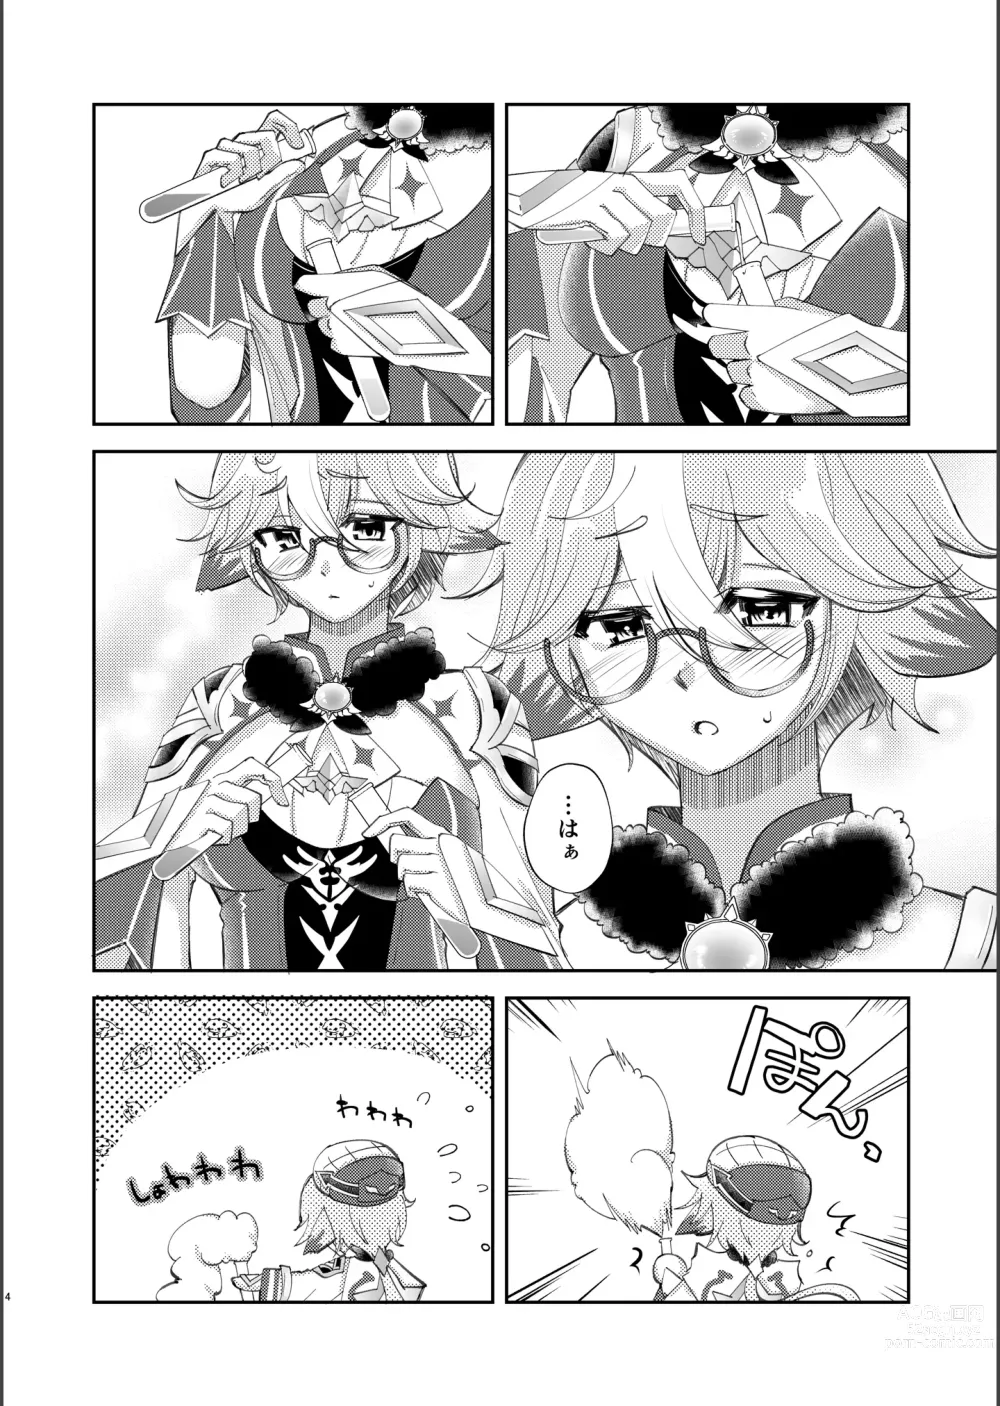 Page 3 of doujinshi repressed